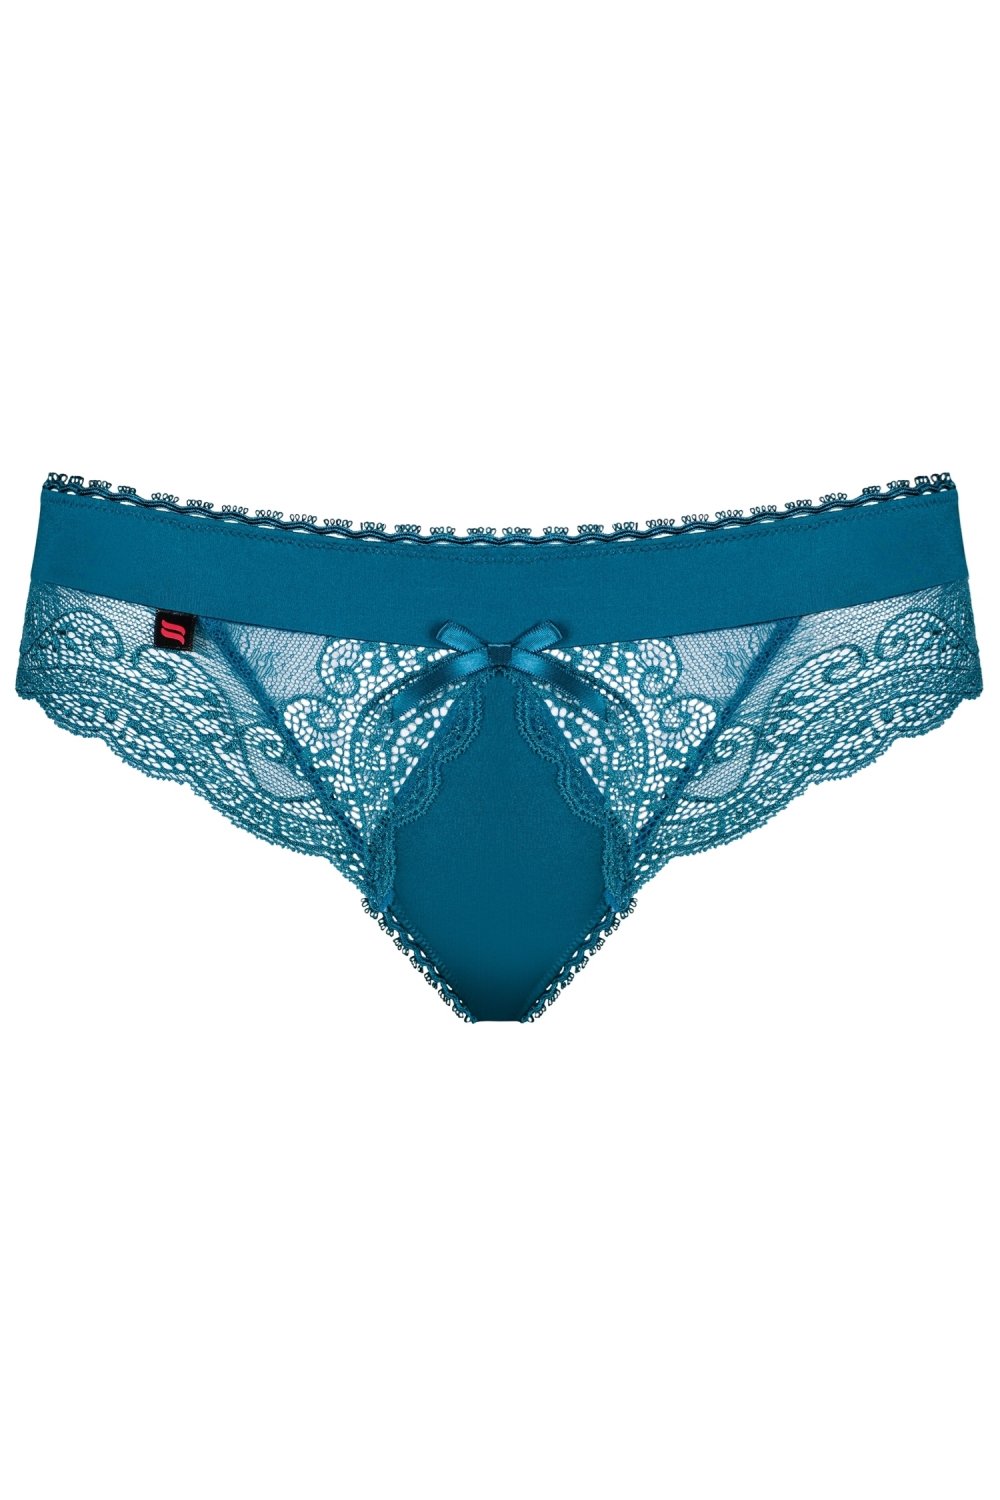 culotte turquoise